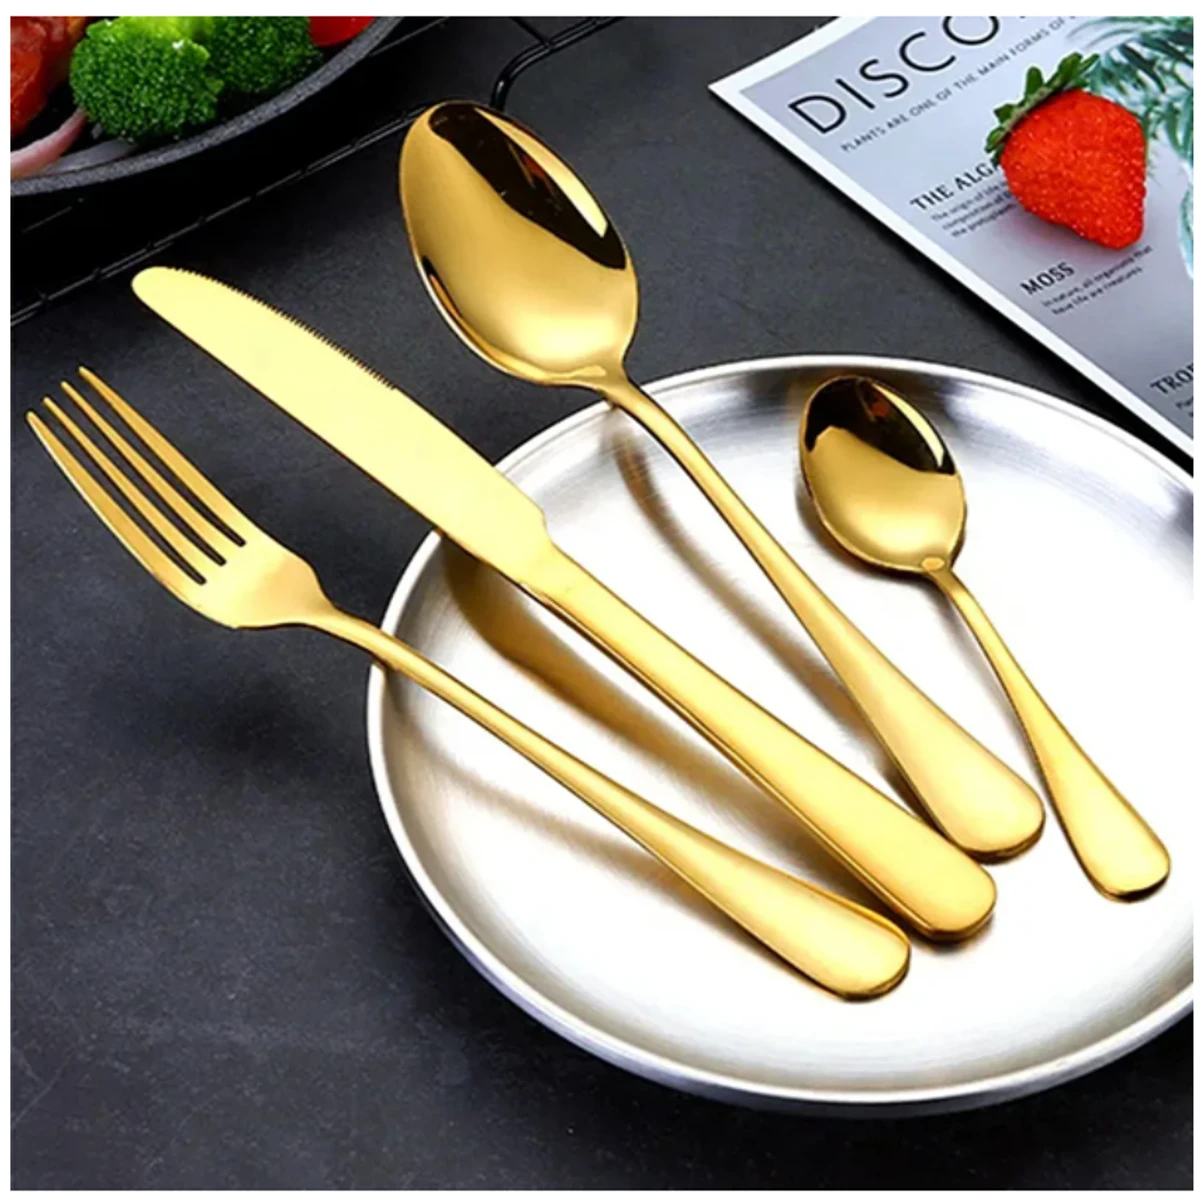 CUTLERY GOLD-PLATED 24-PIECE SET